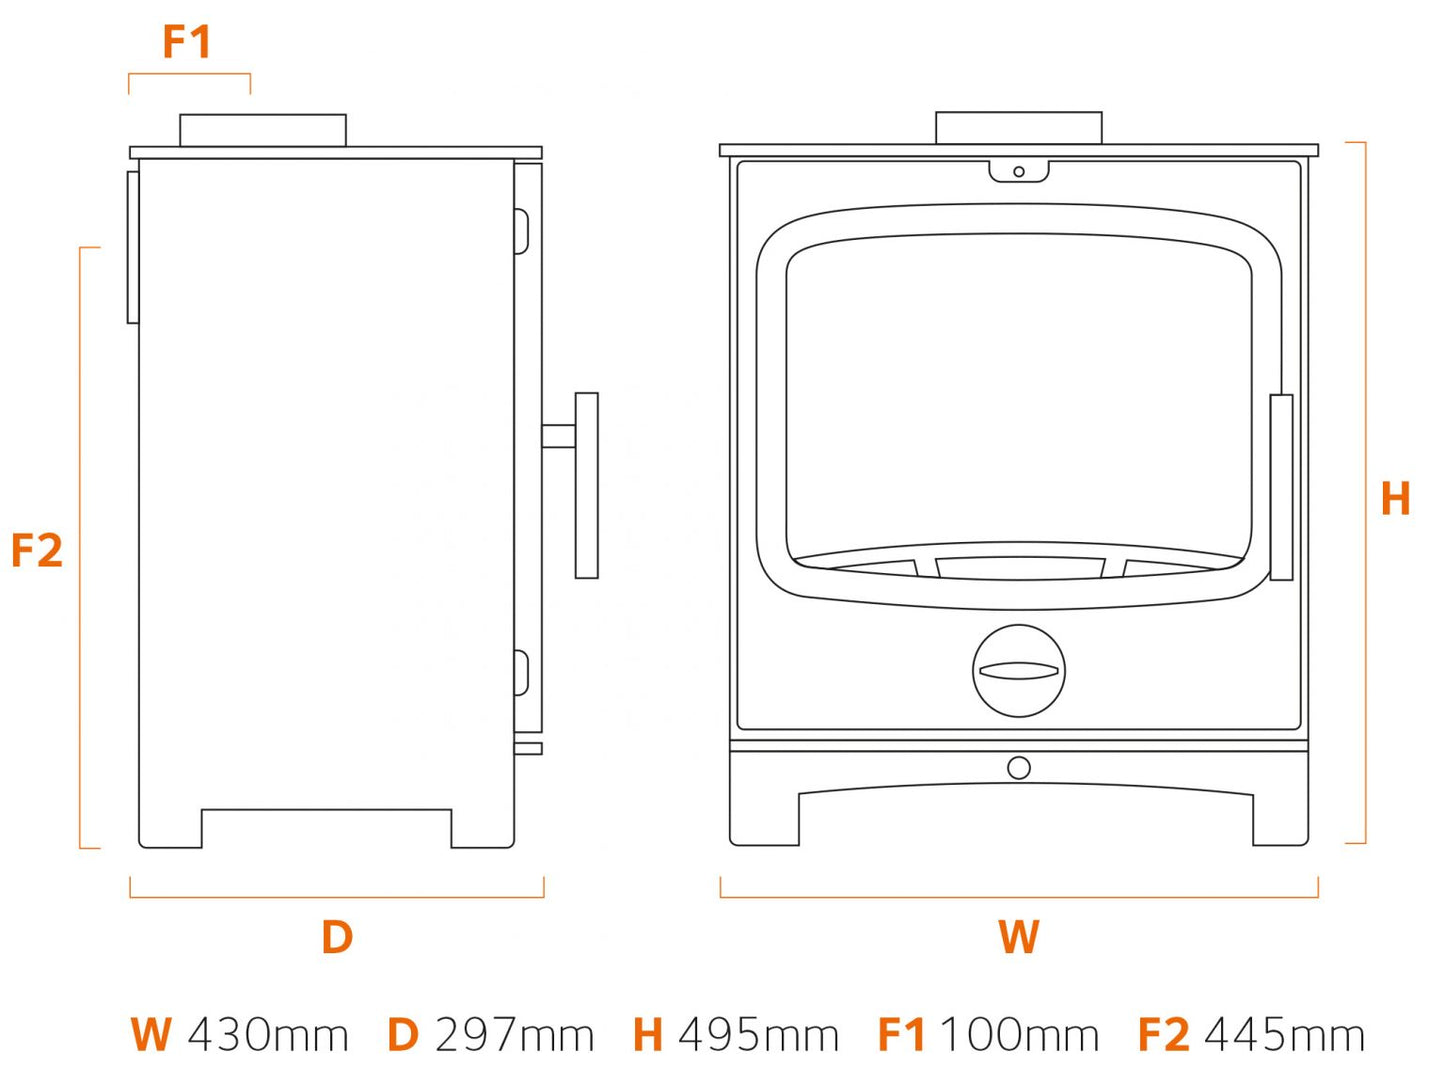 Dimensions and specifications for the Stubby 5 Multifuel stove